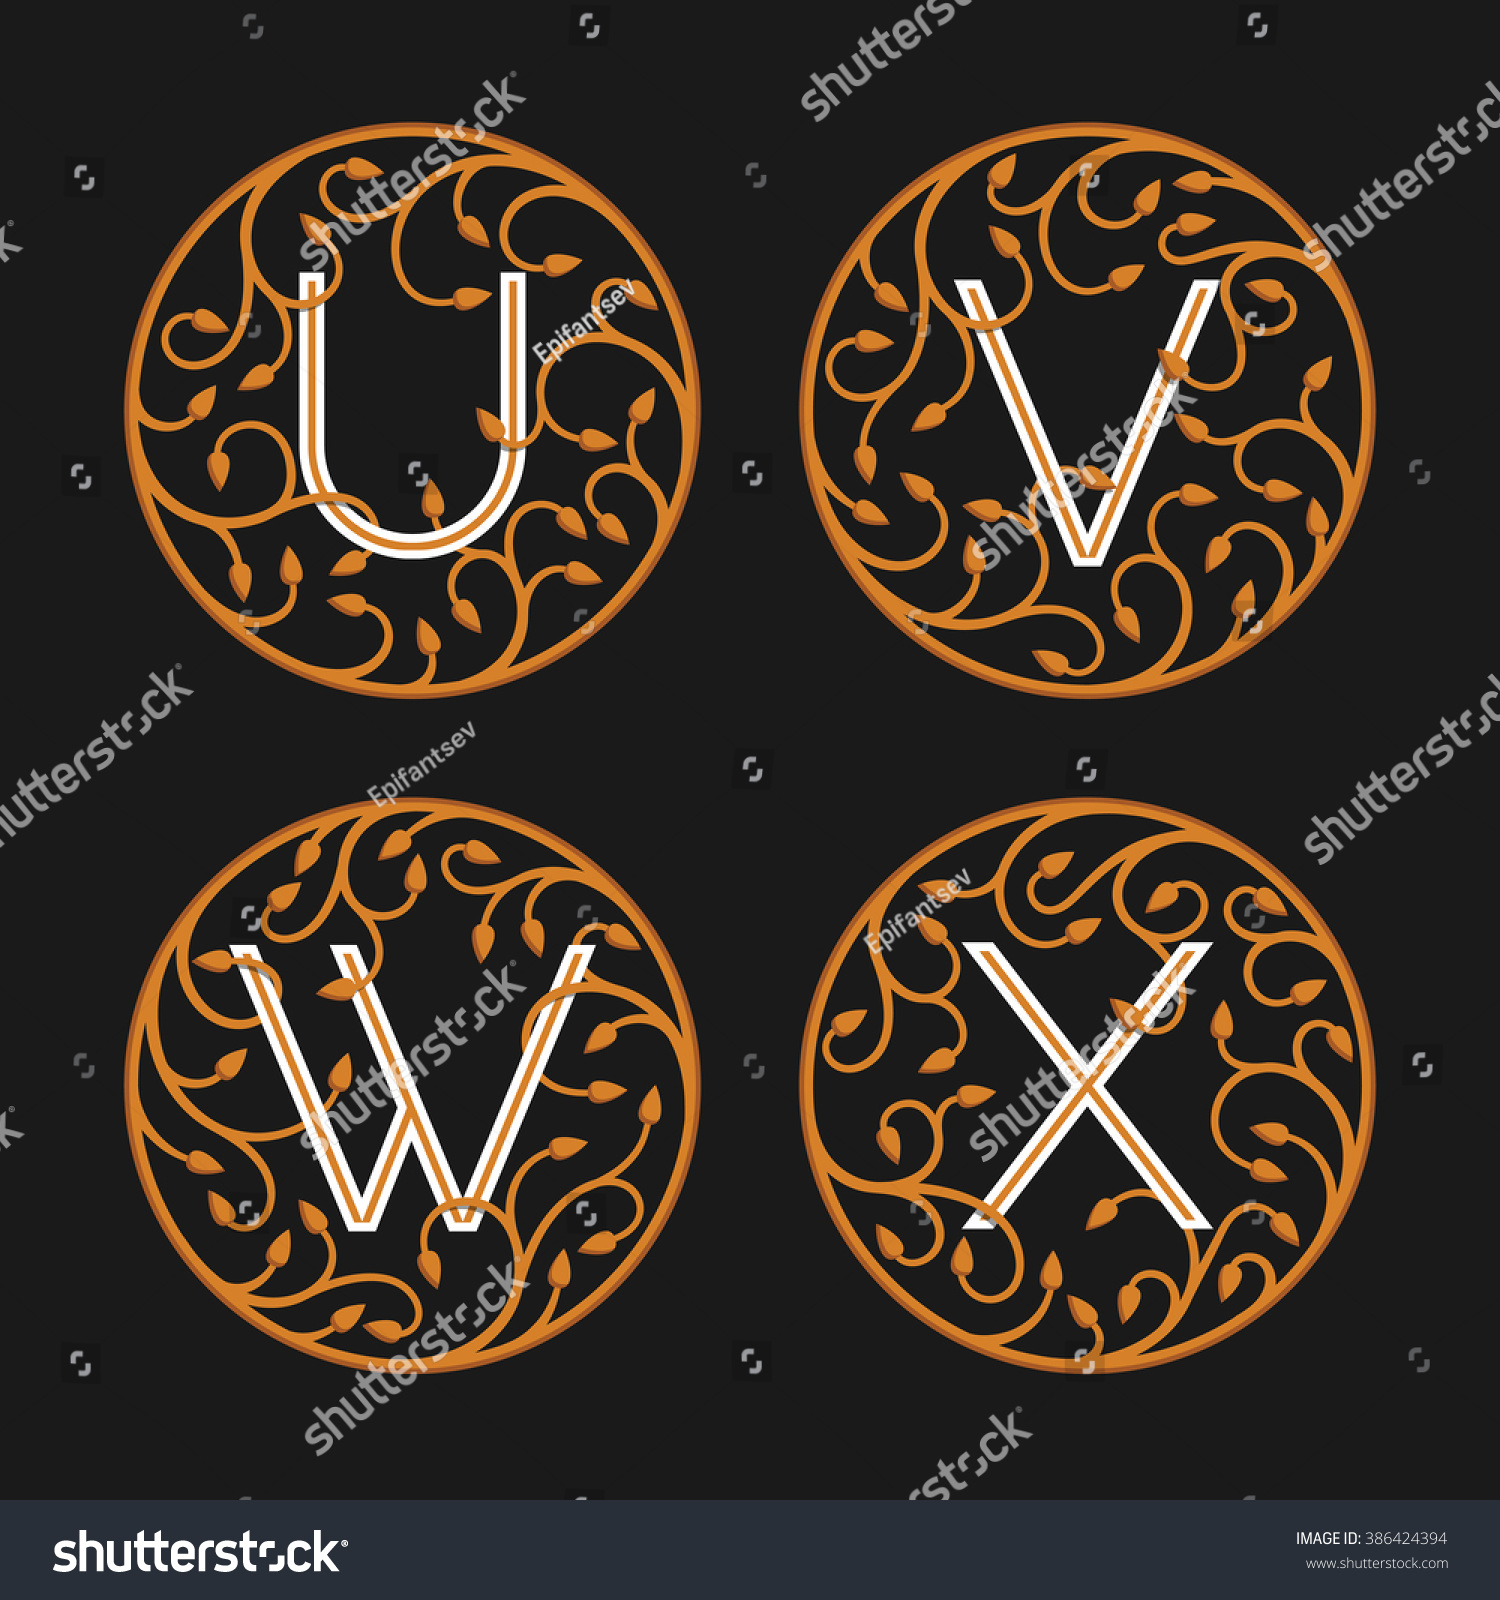 Decorative Initial Letters U V W Stock Vector Royalty Free